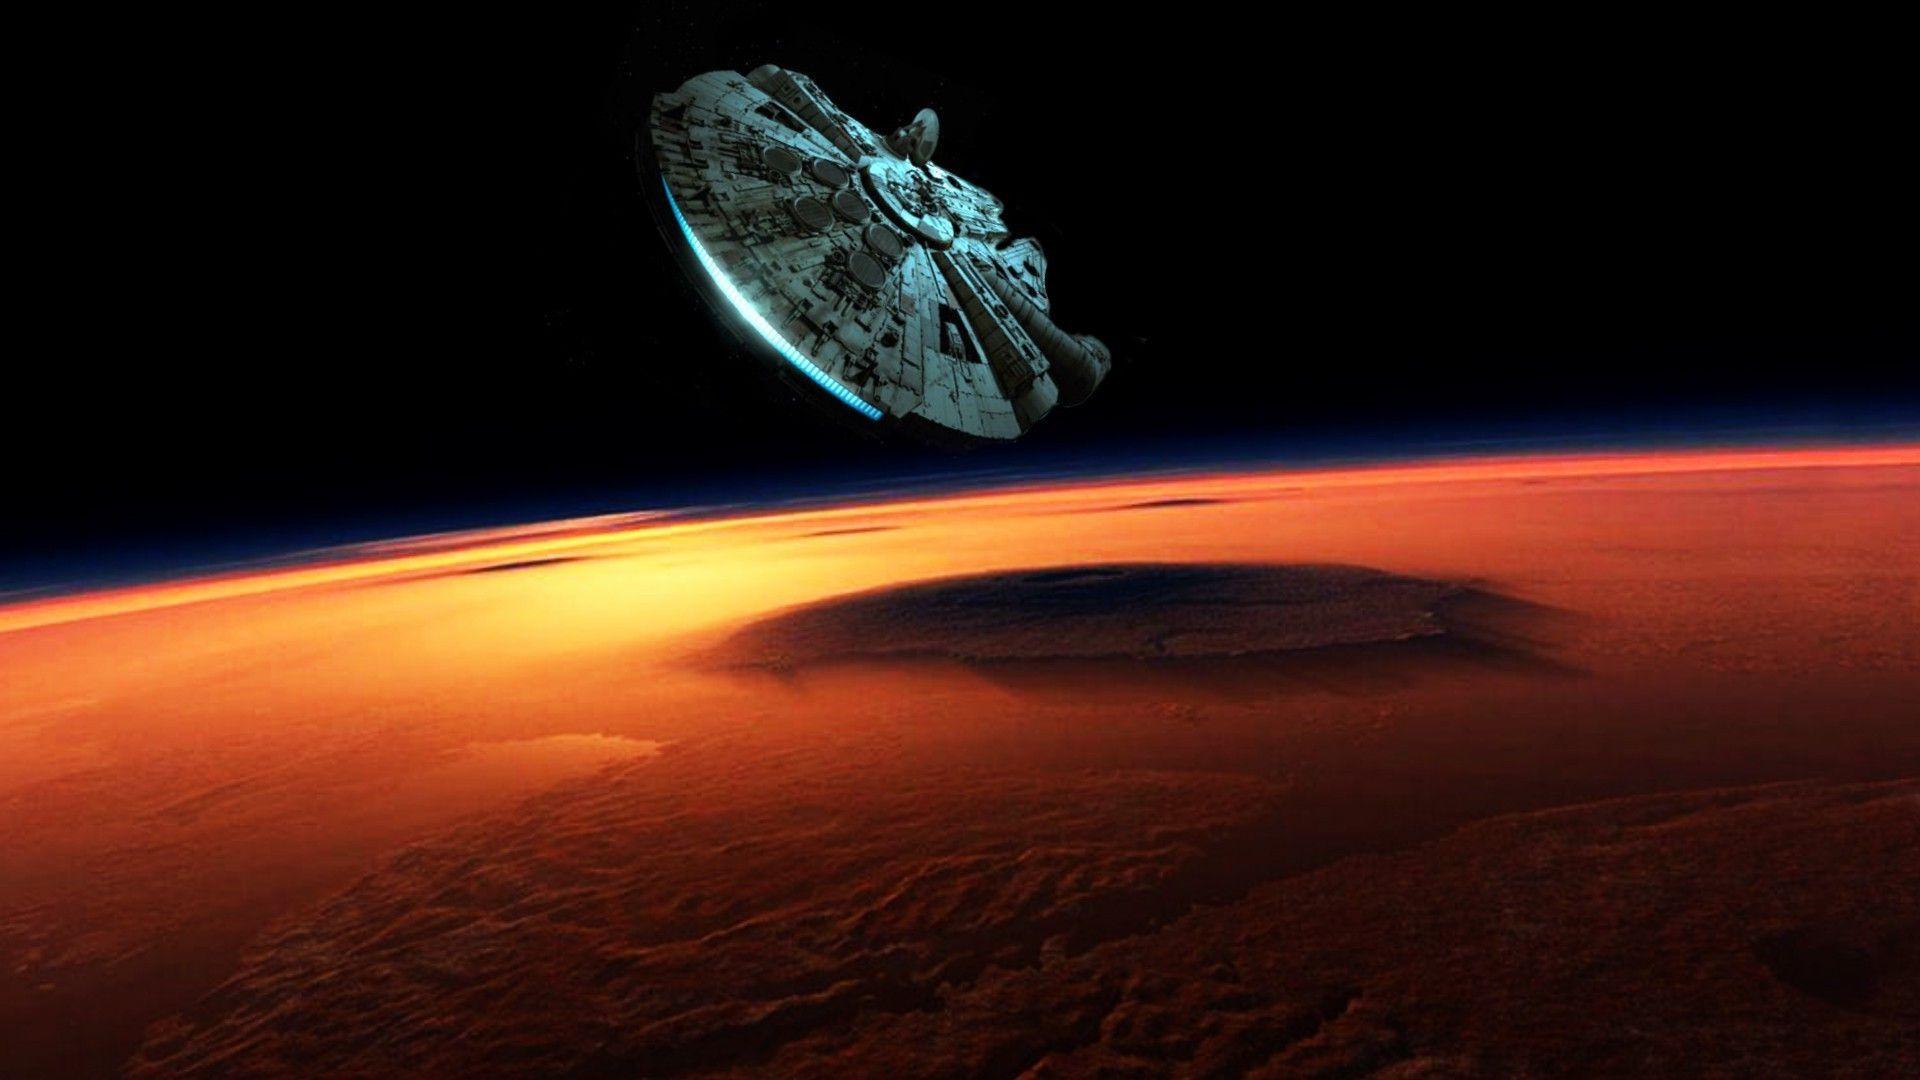 Star Wars Planet Wallpapers - Top Free Star Wars Planet Backgrounds